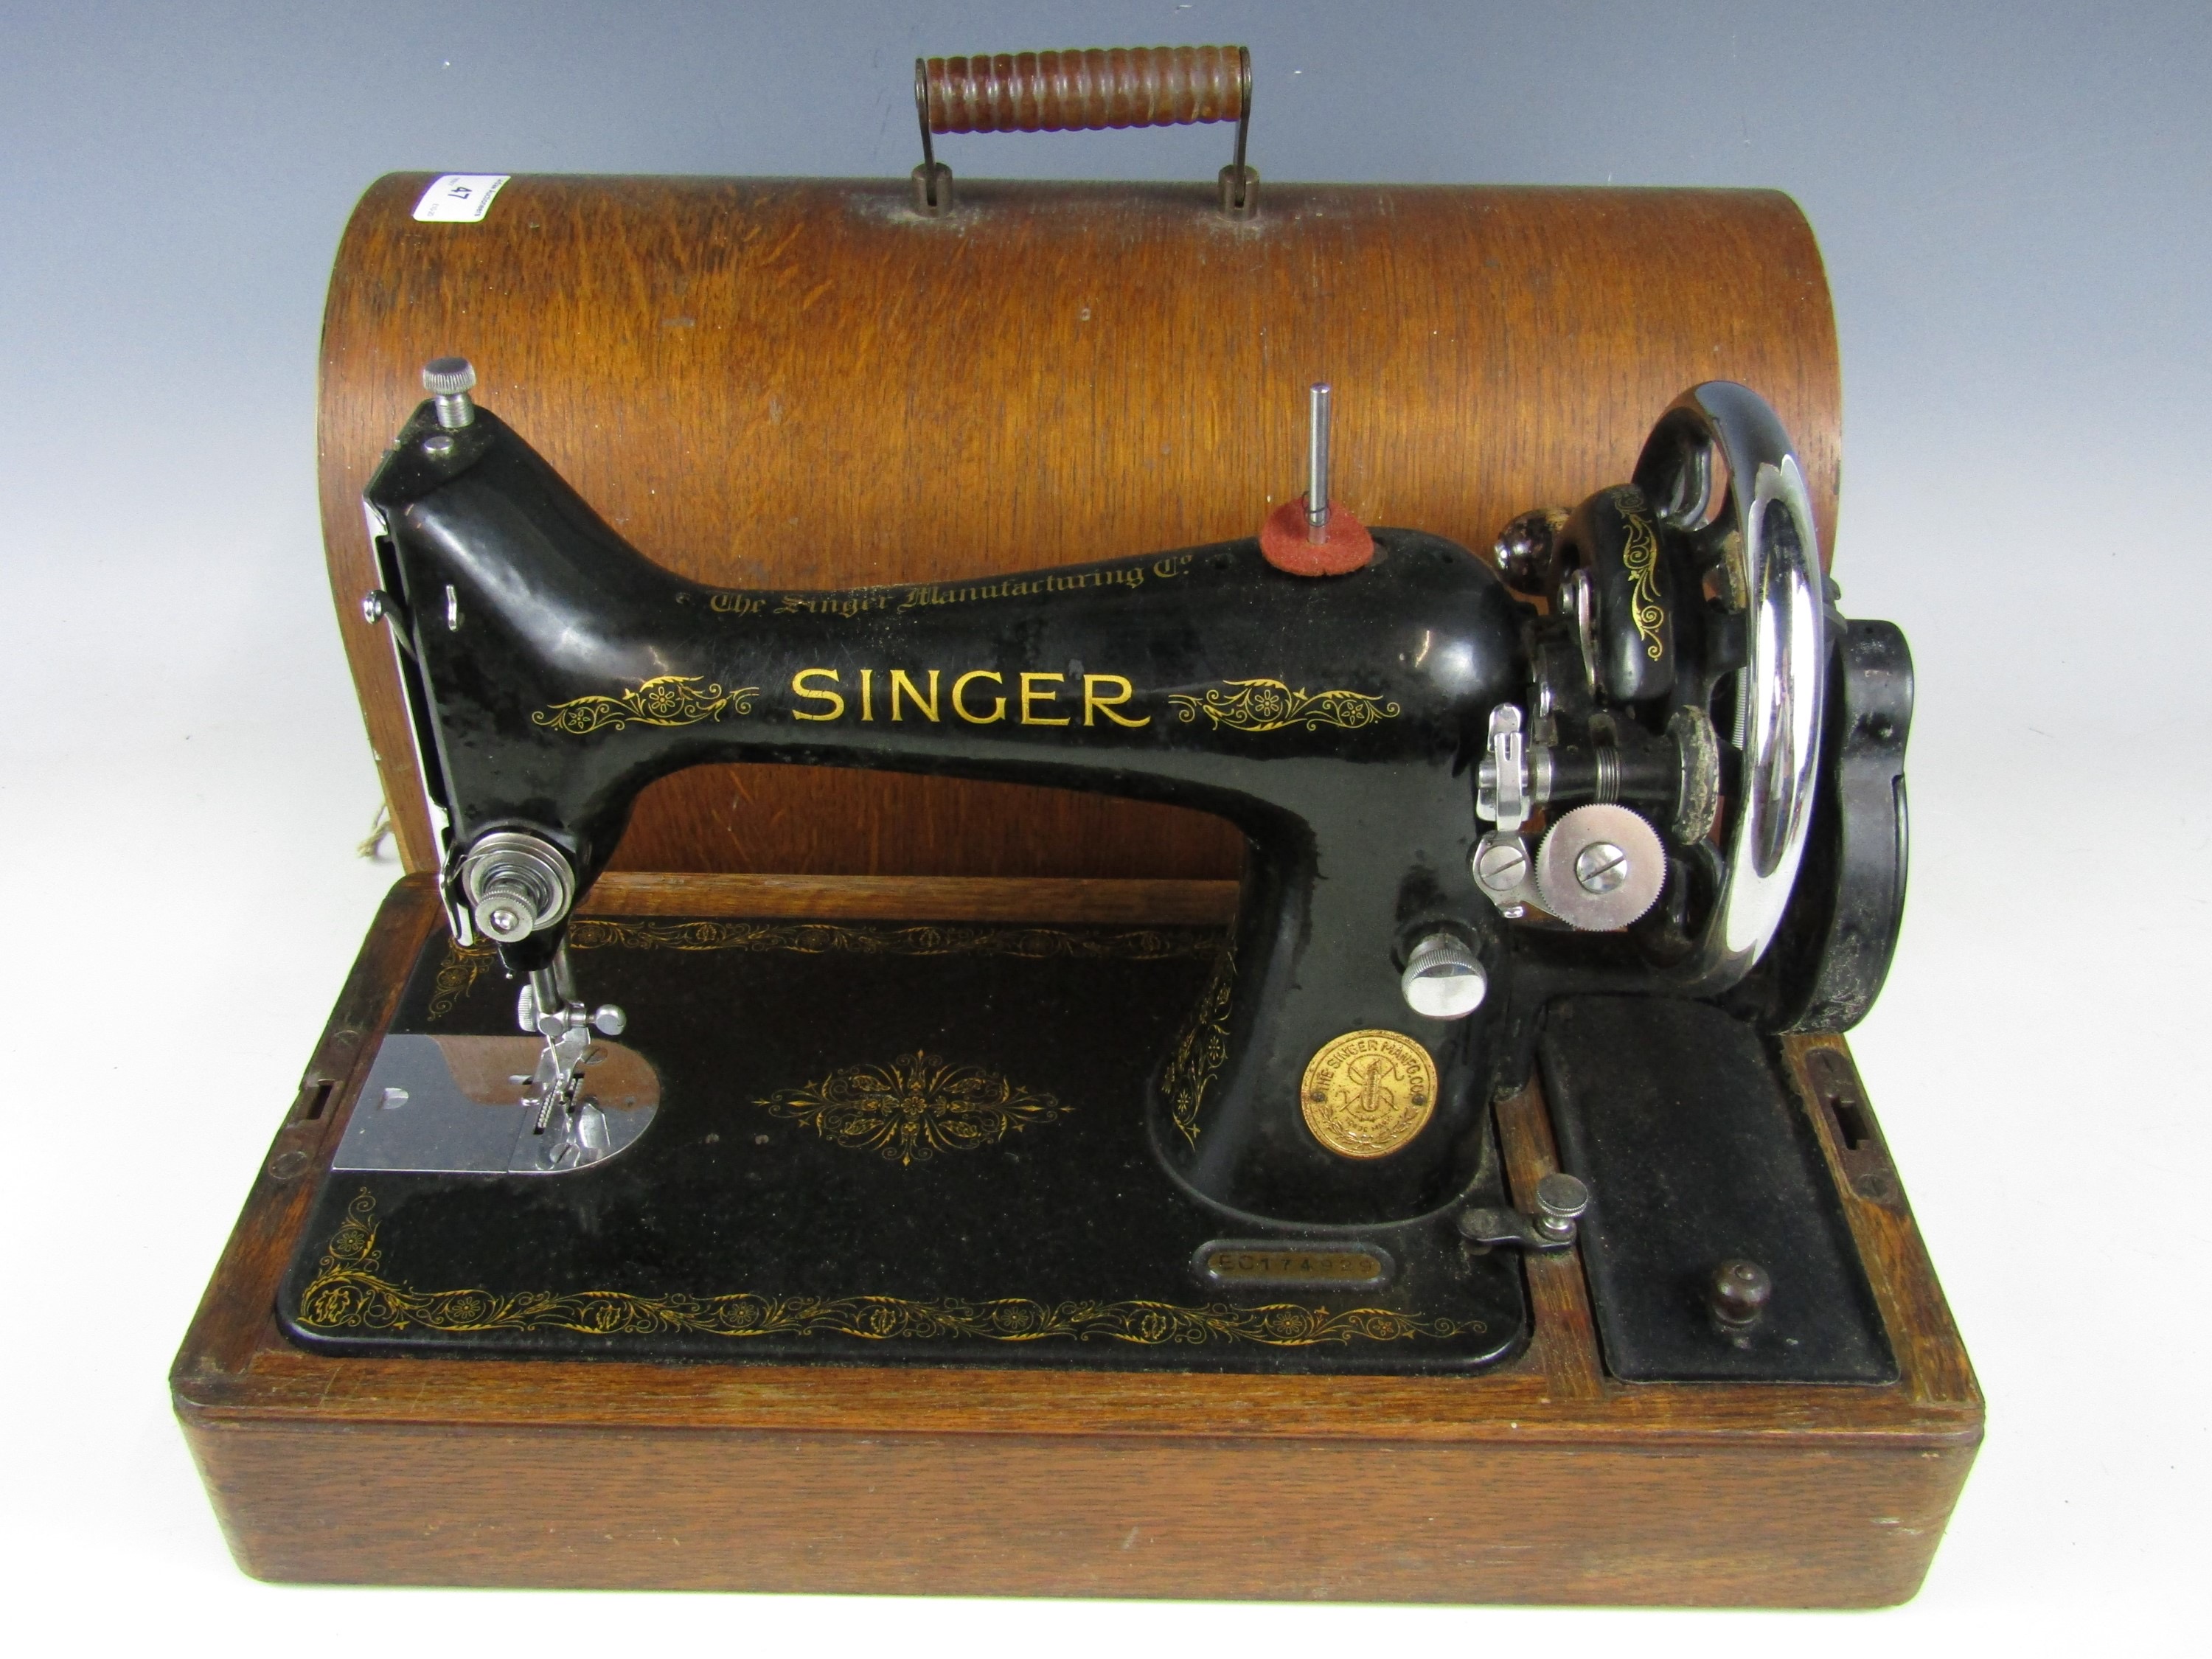 A late 19th / early 20th Century Singer hand operated sewing machine